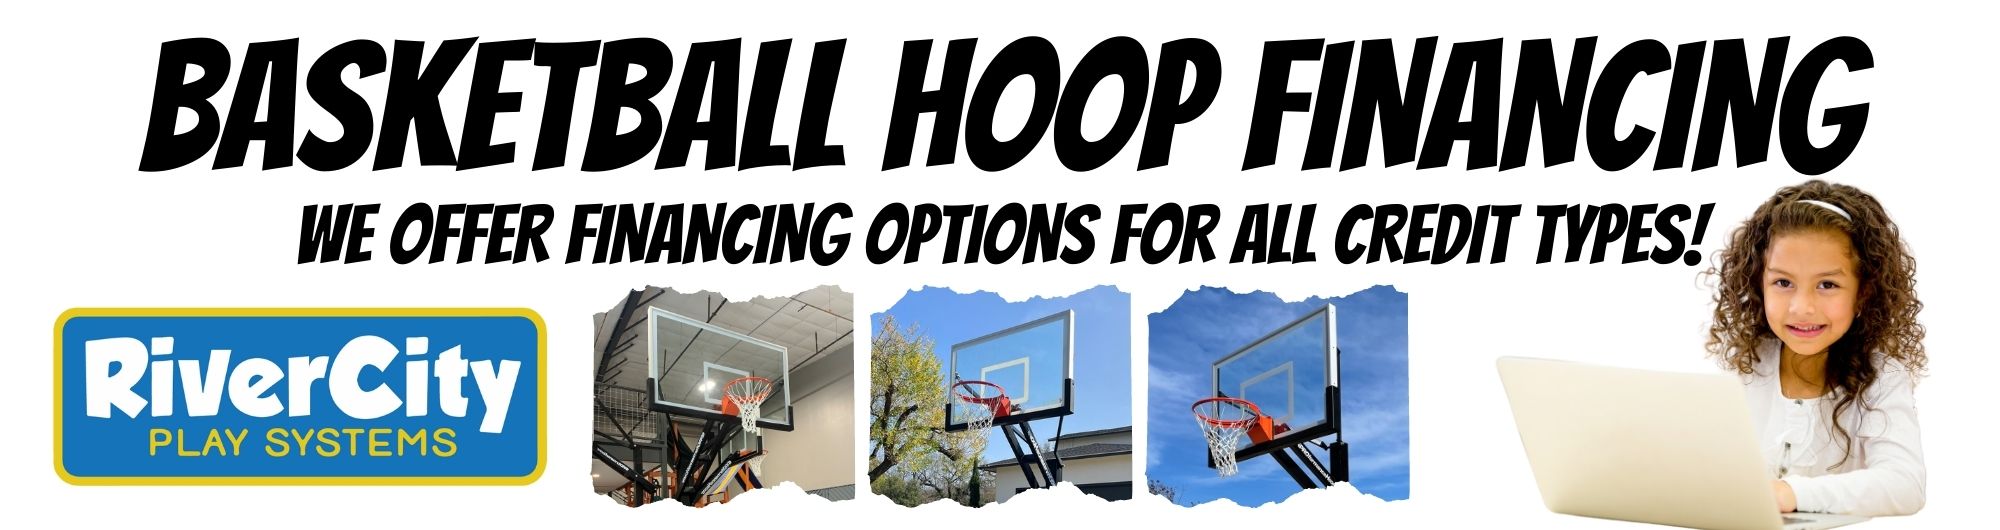 Finance your basketball hoop purchase at River City Play Systems